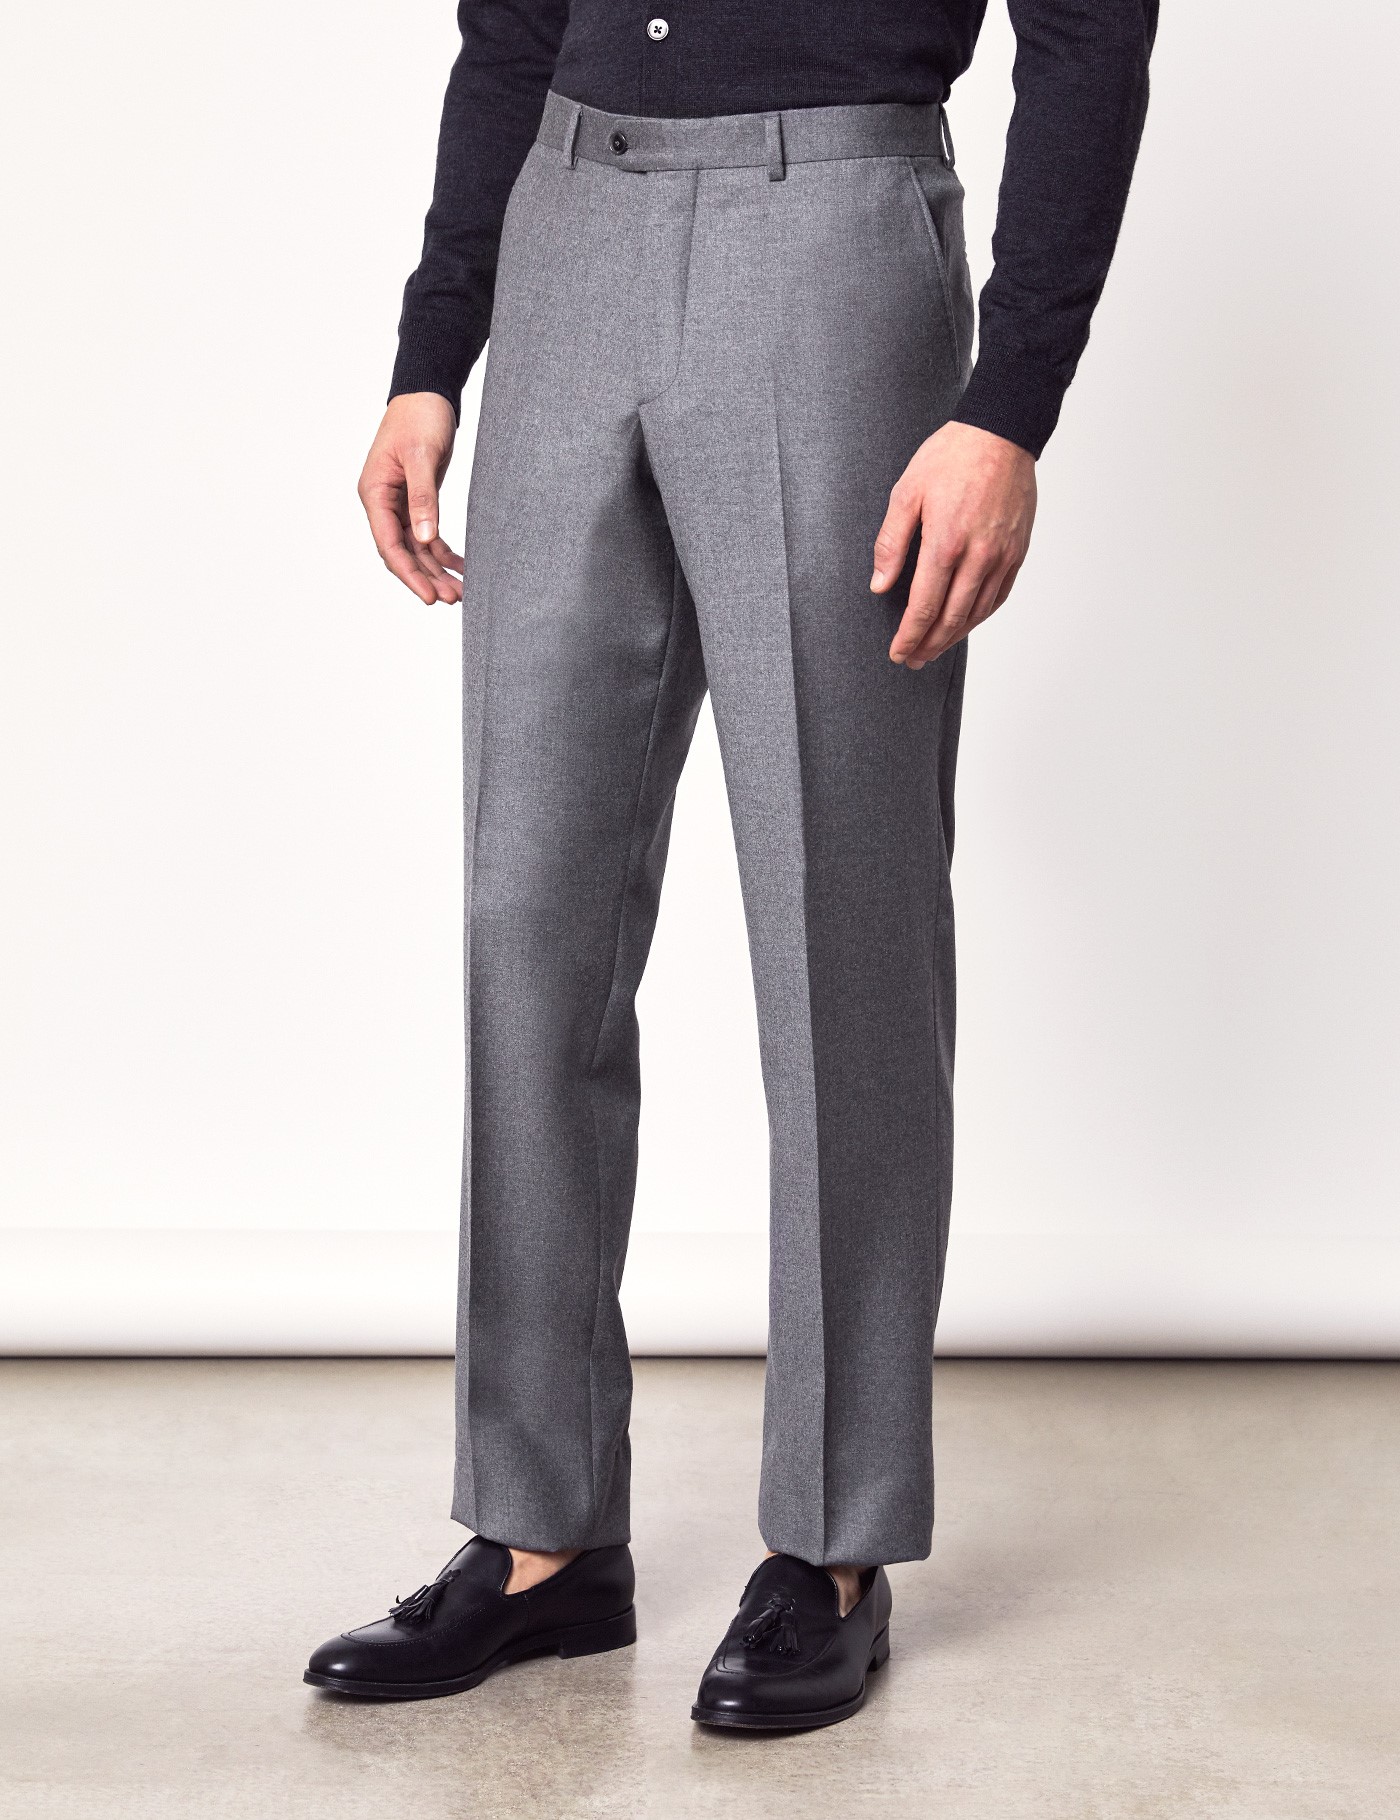 Men’s Light Grey Italian Flannel Trousers – 1913 Collection | Hawes & Curtis